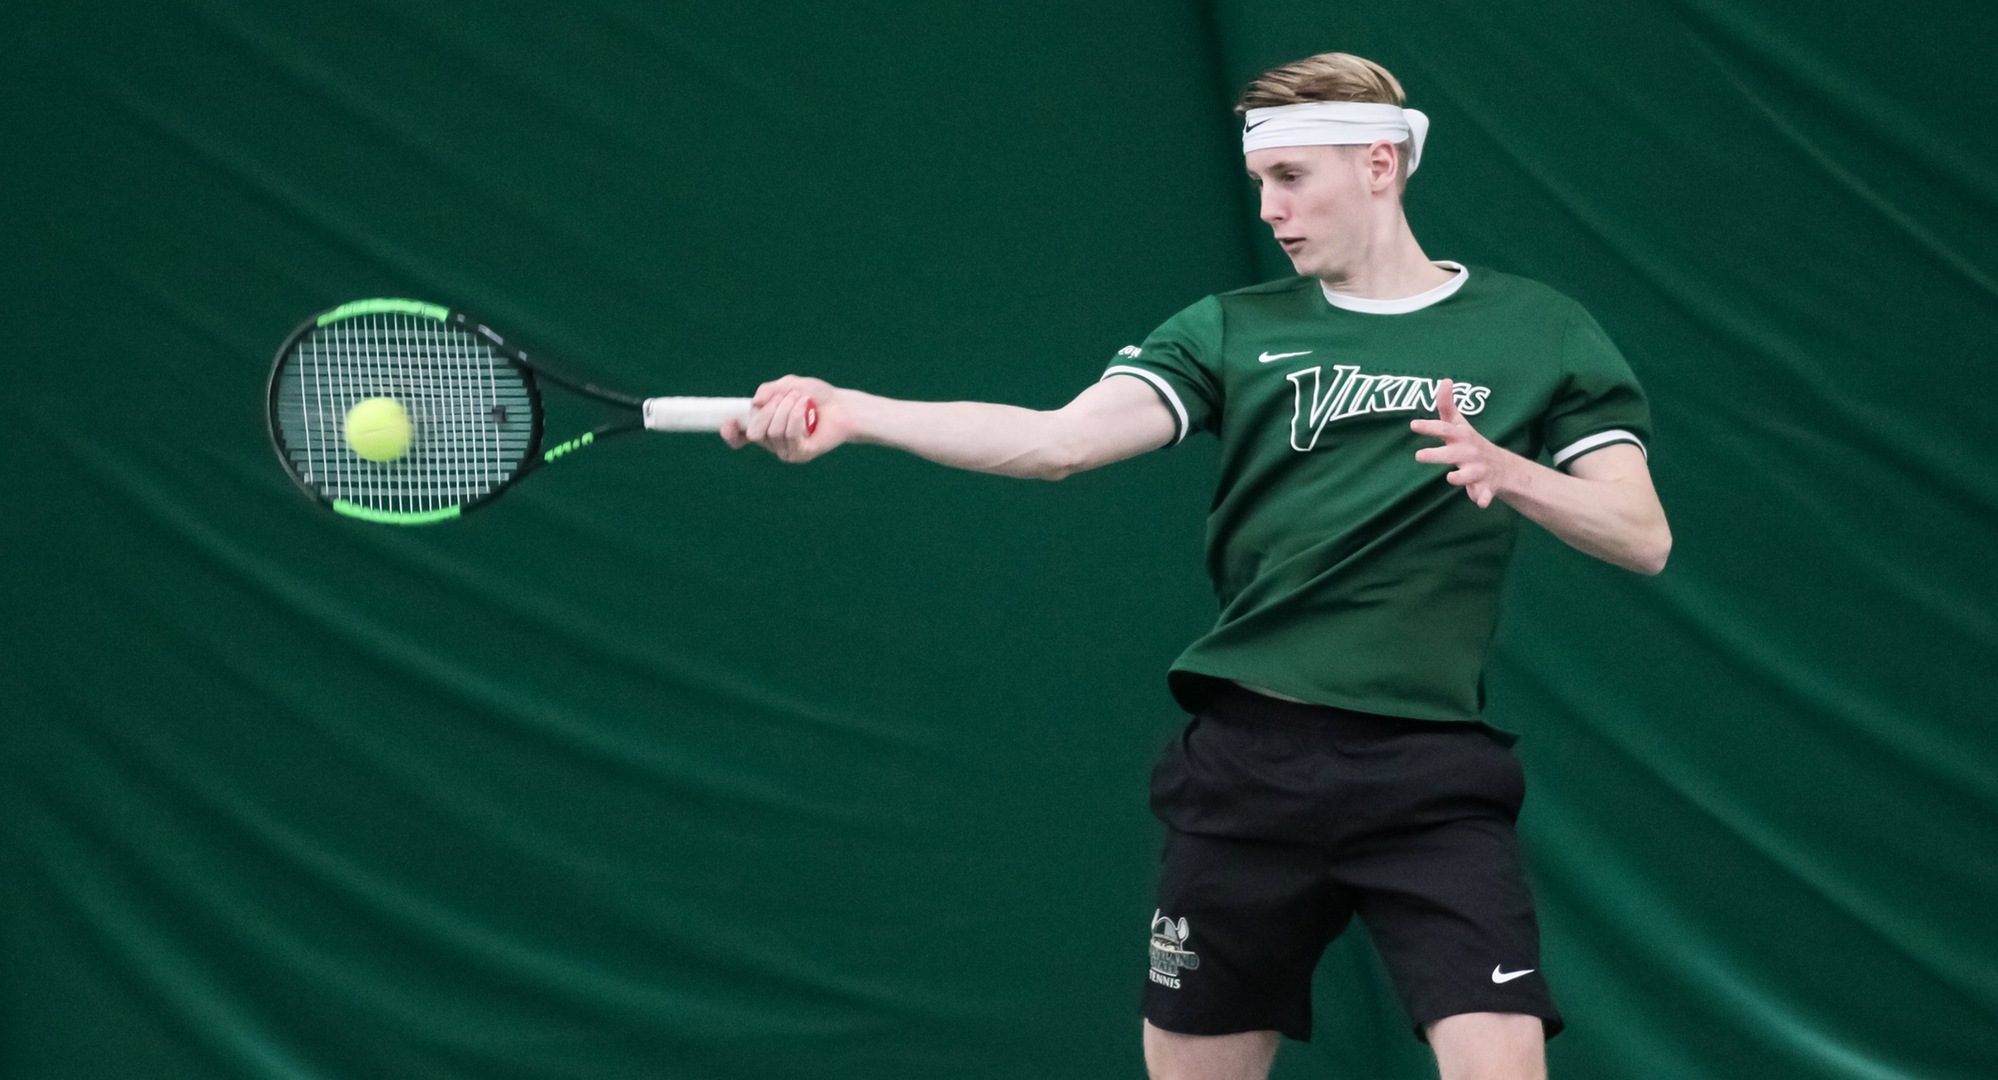 Vikings Pick Up 6-1 Victory At Duquesne To Close Out Roadswing